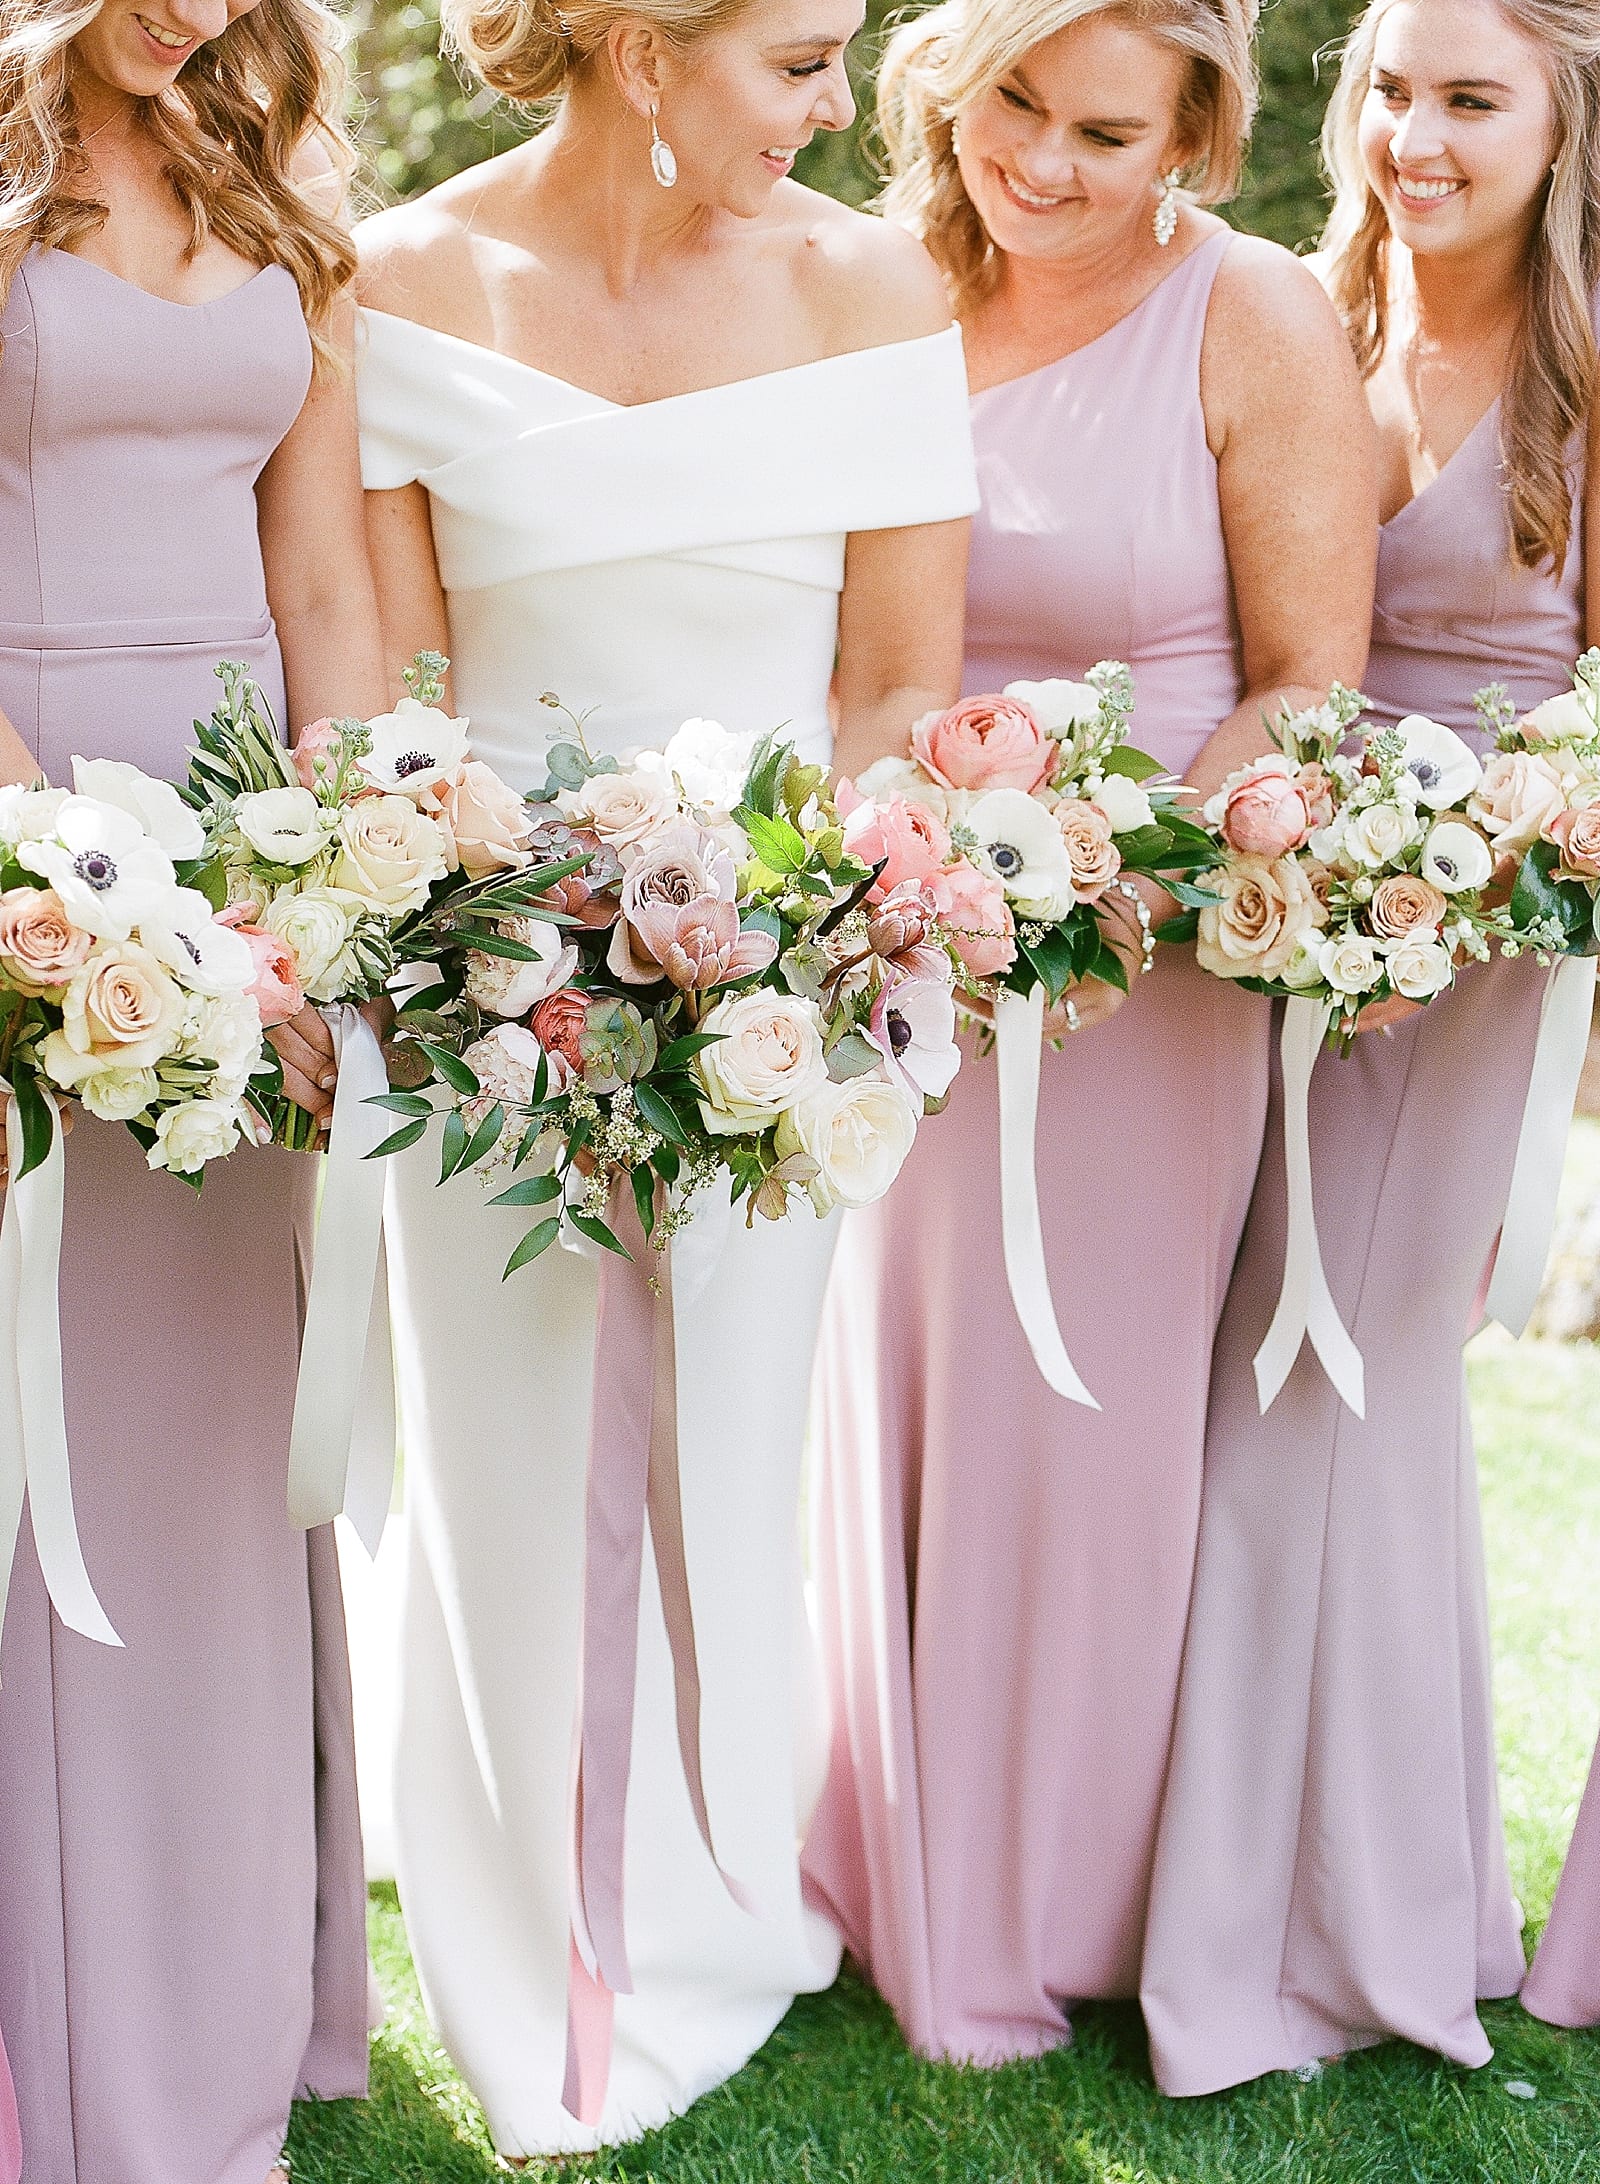 Bride with Bridesmaids in Purple Gowns Holding Bouquets Photo